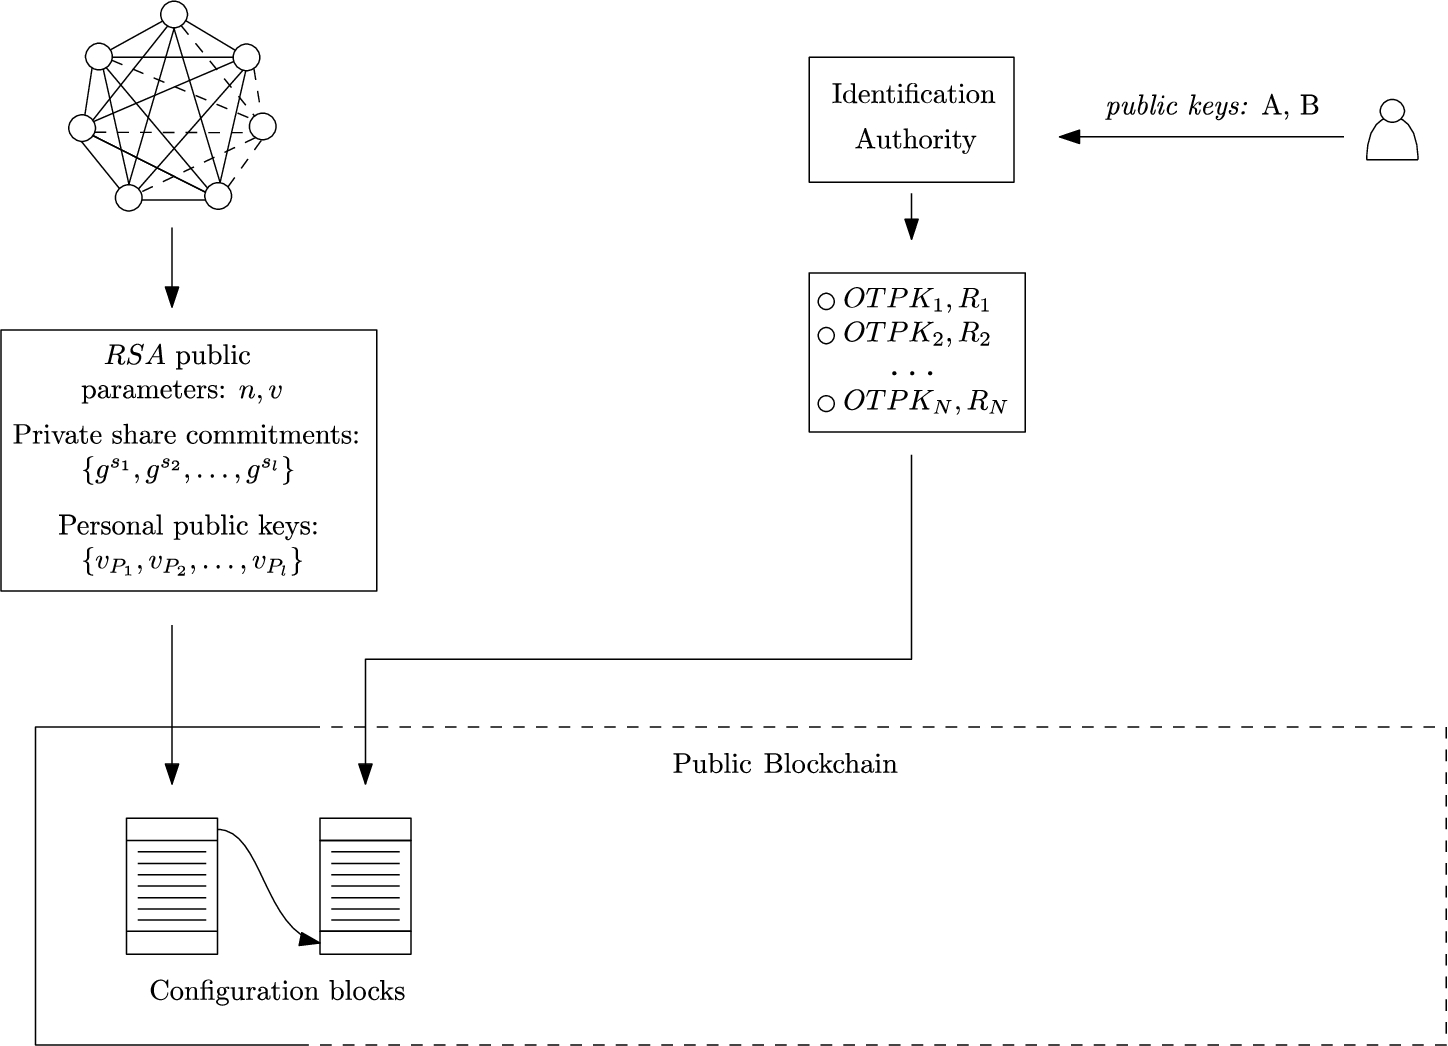 Electors register their public keys in a local identification authority. The identification authority computes the 
OTPKs. All the public parameters of the election are added as the first blocks of the blockchain.